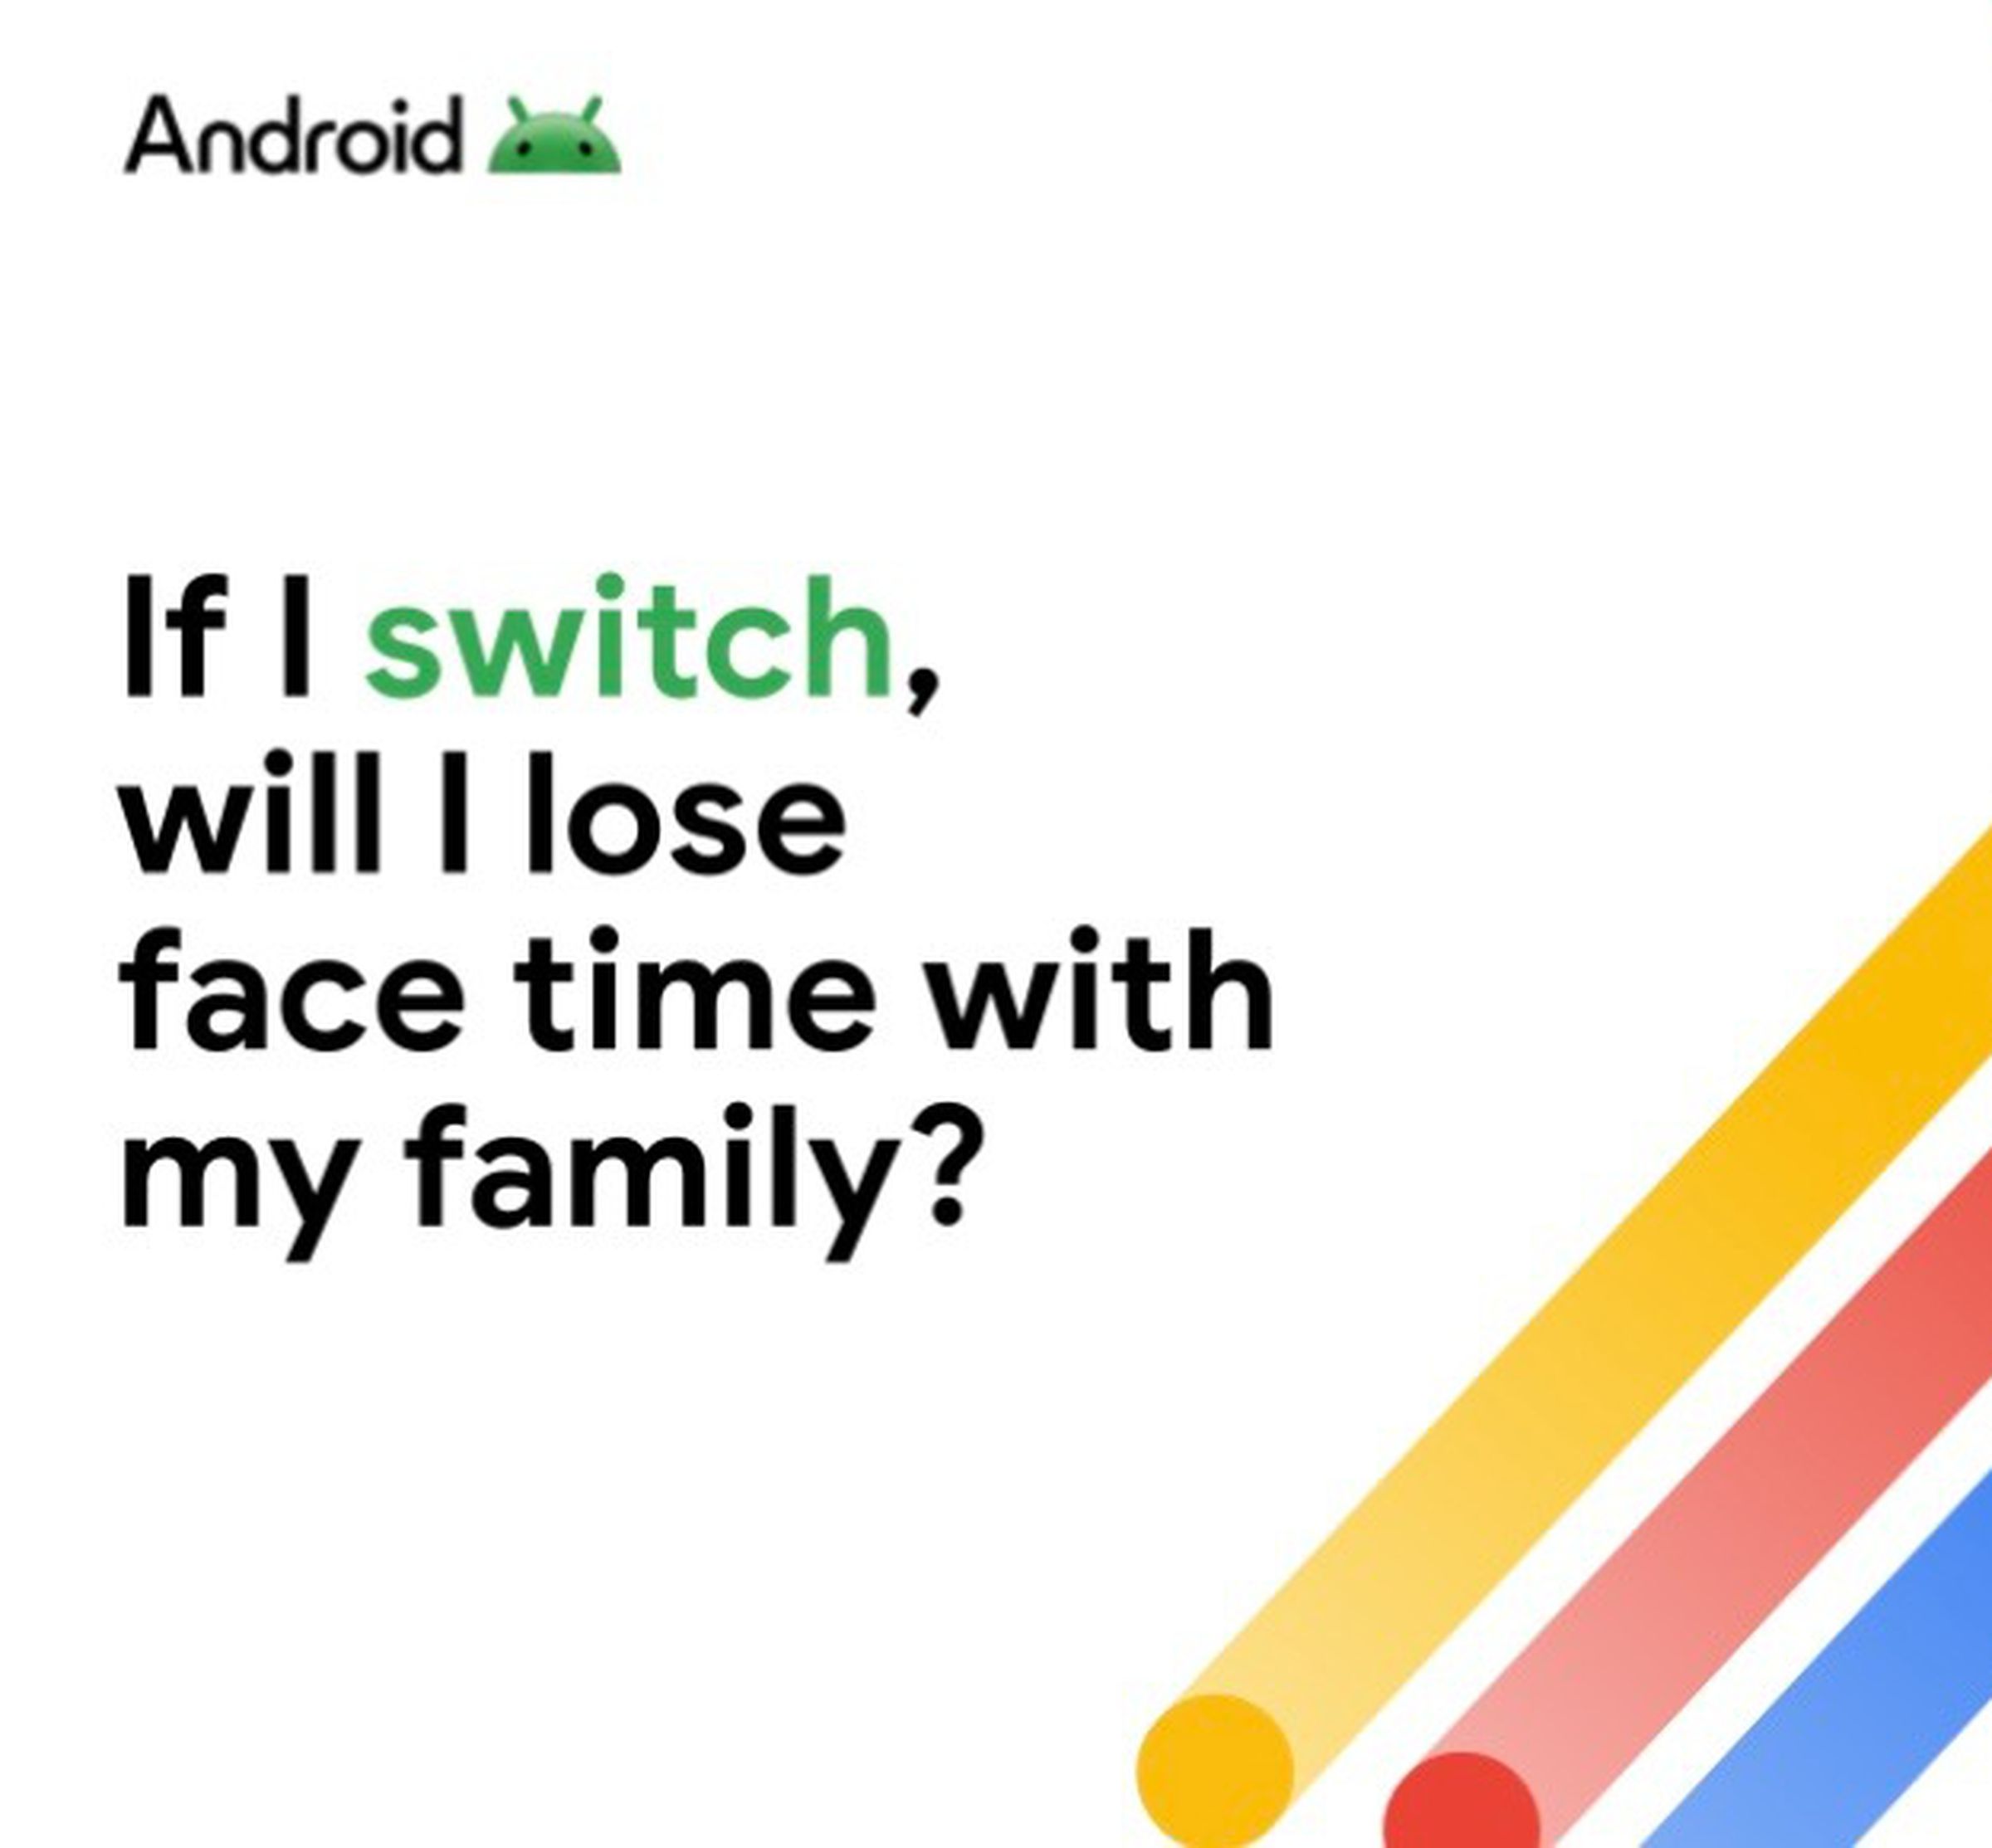 An Android ad with the new Android lettering, which has a capital A at the front.